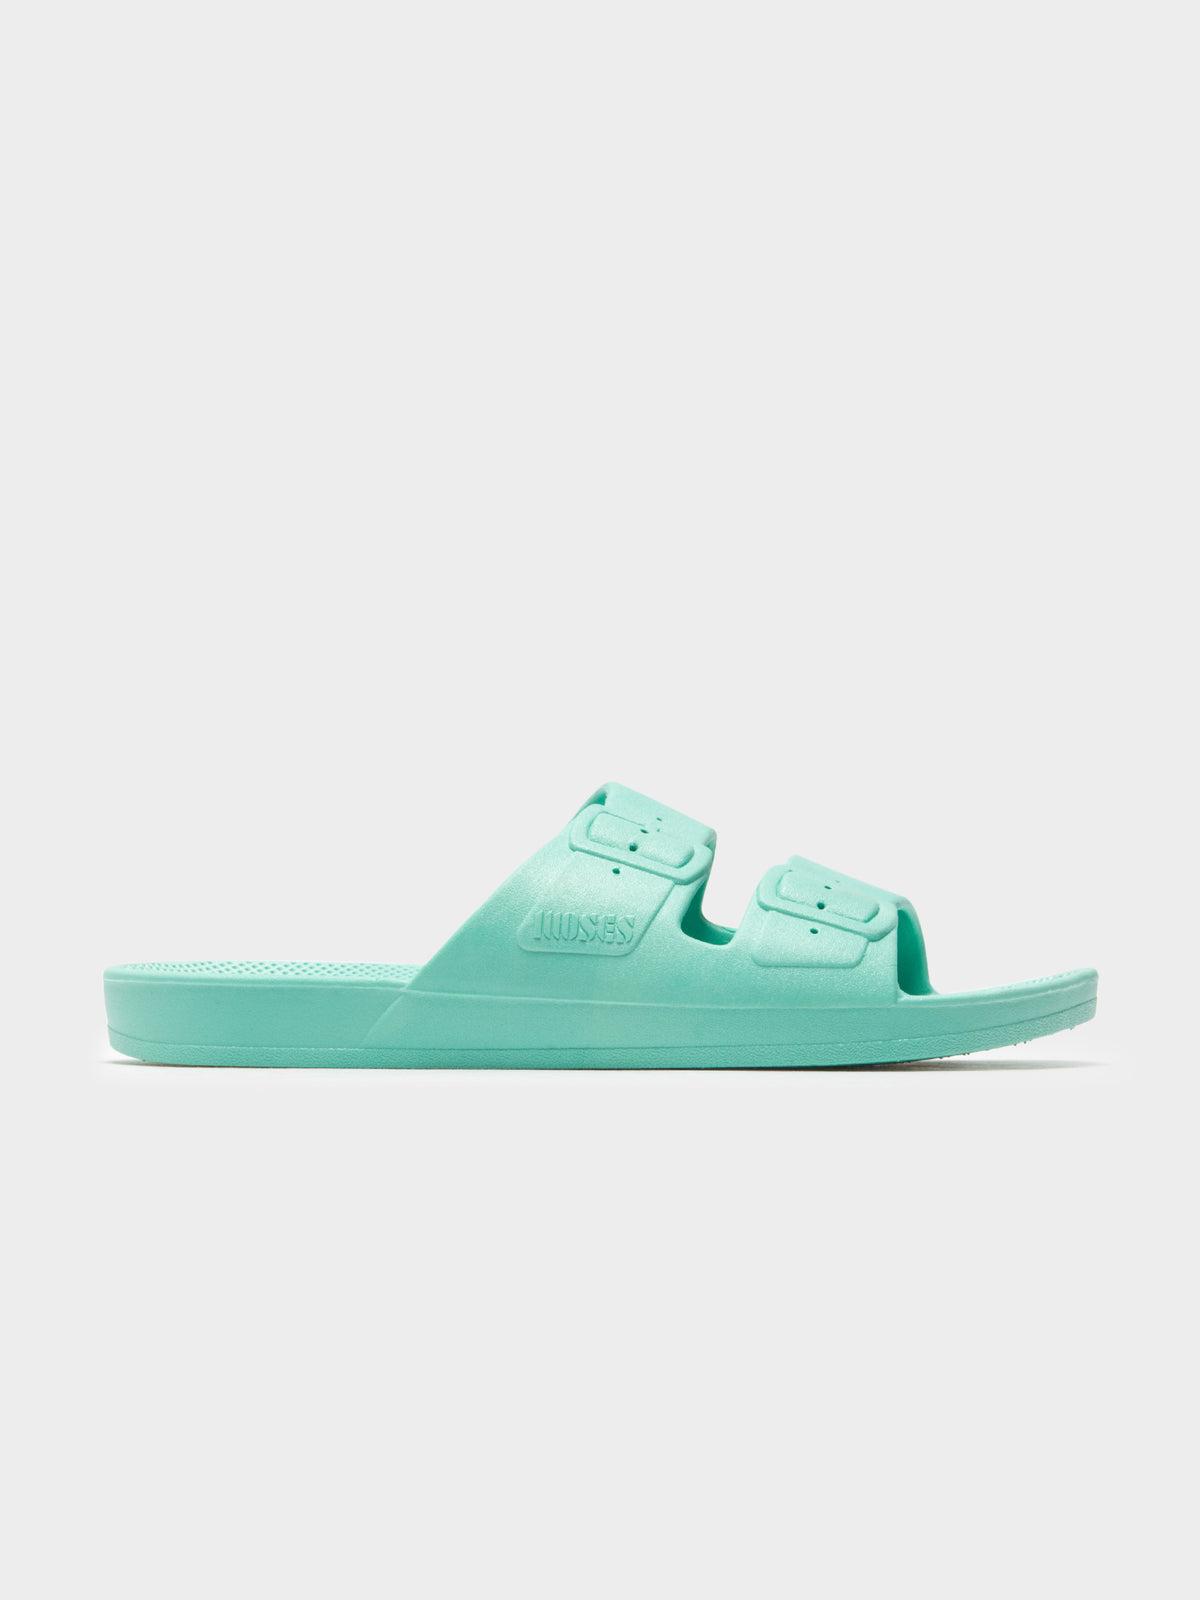 Unisex Freedom Moses Slides in Miami Teal